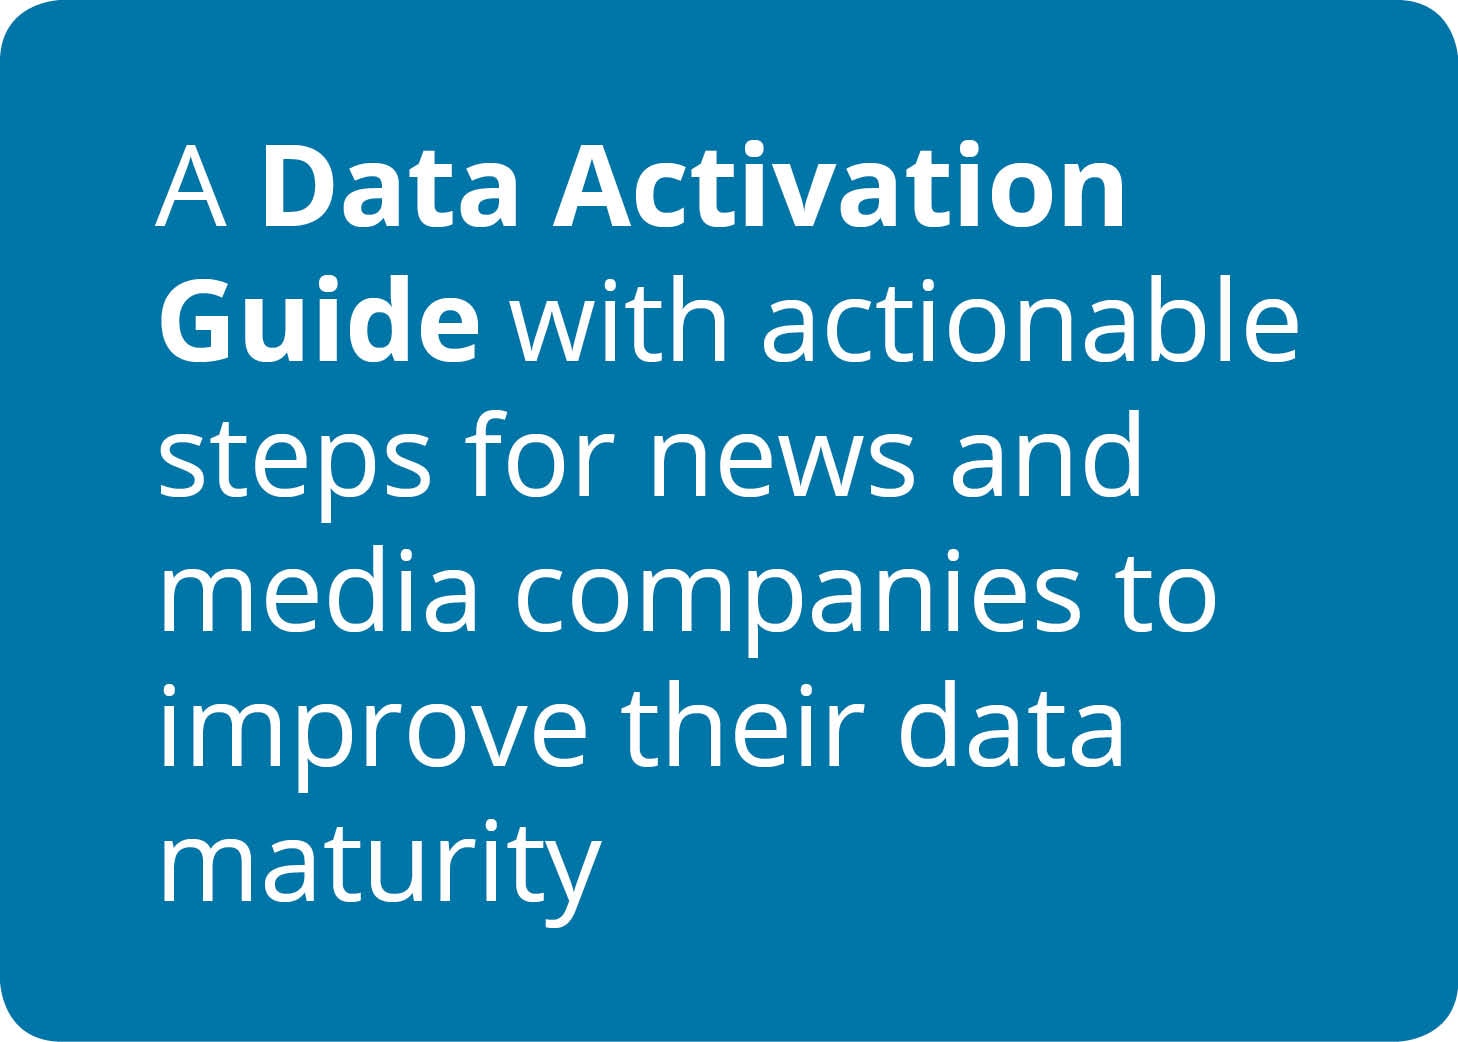 Data activation guide